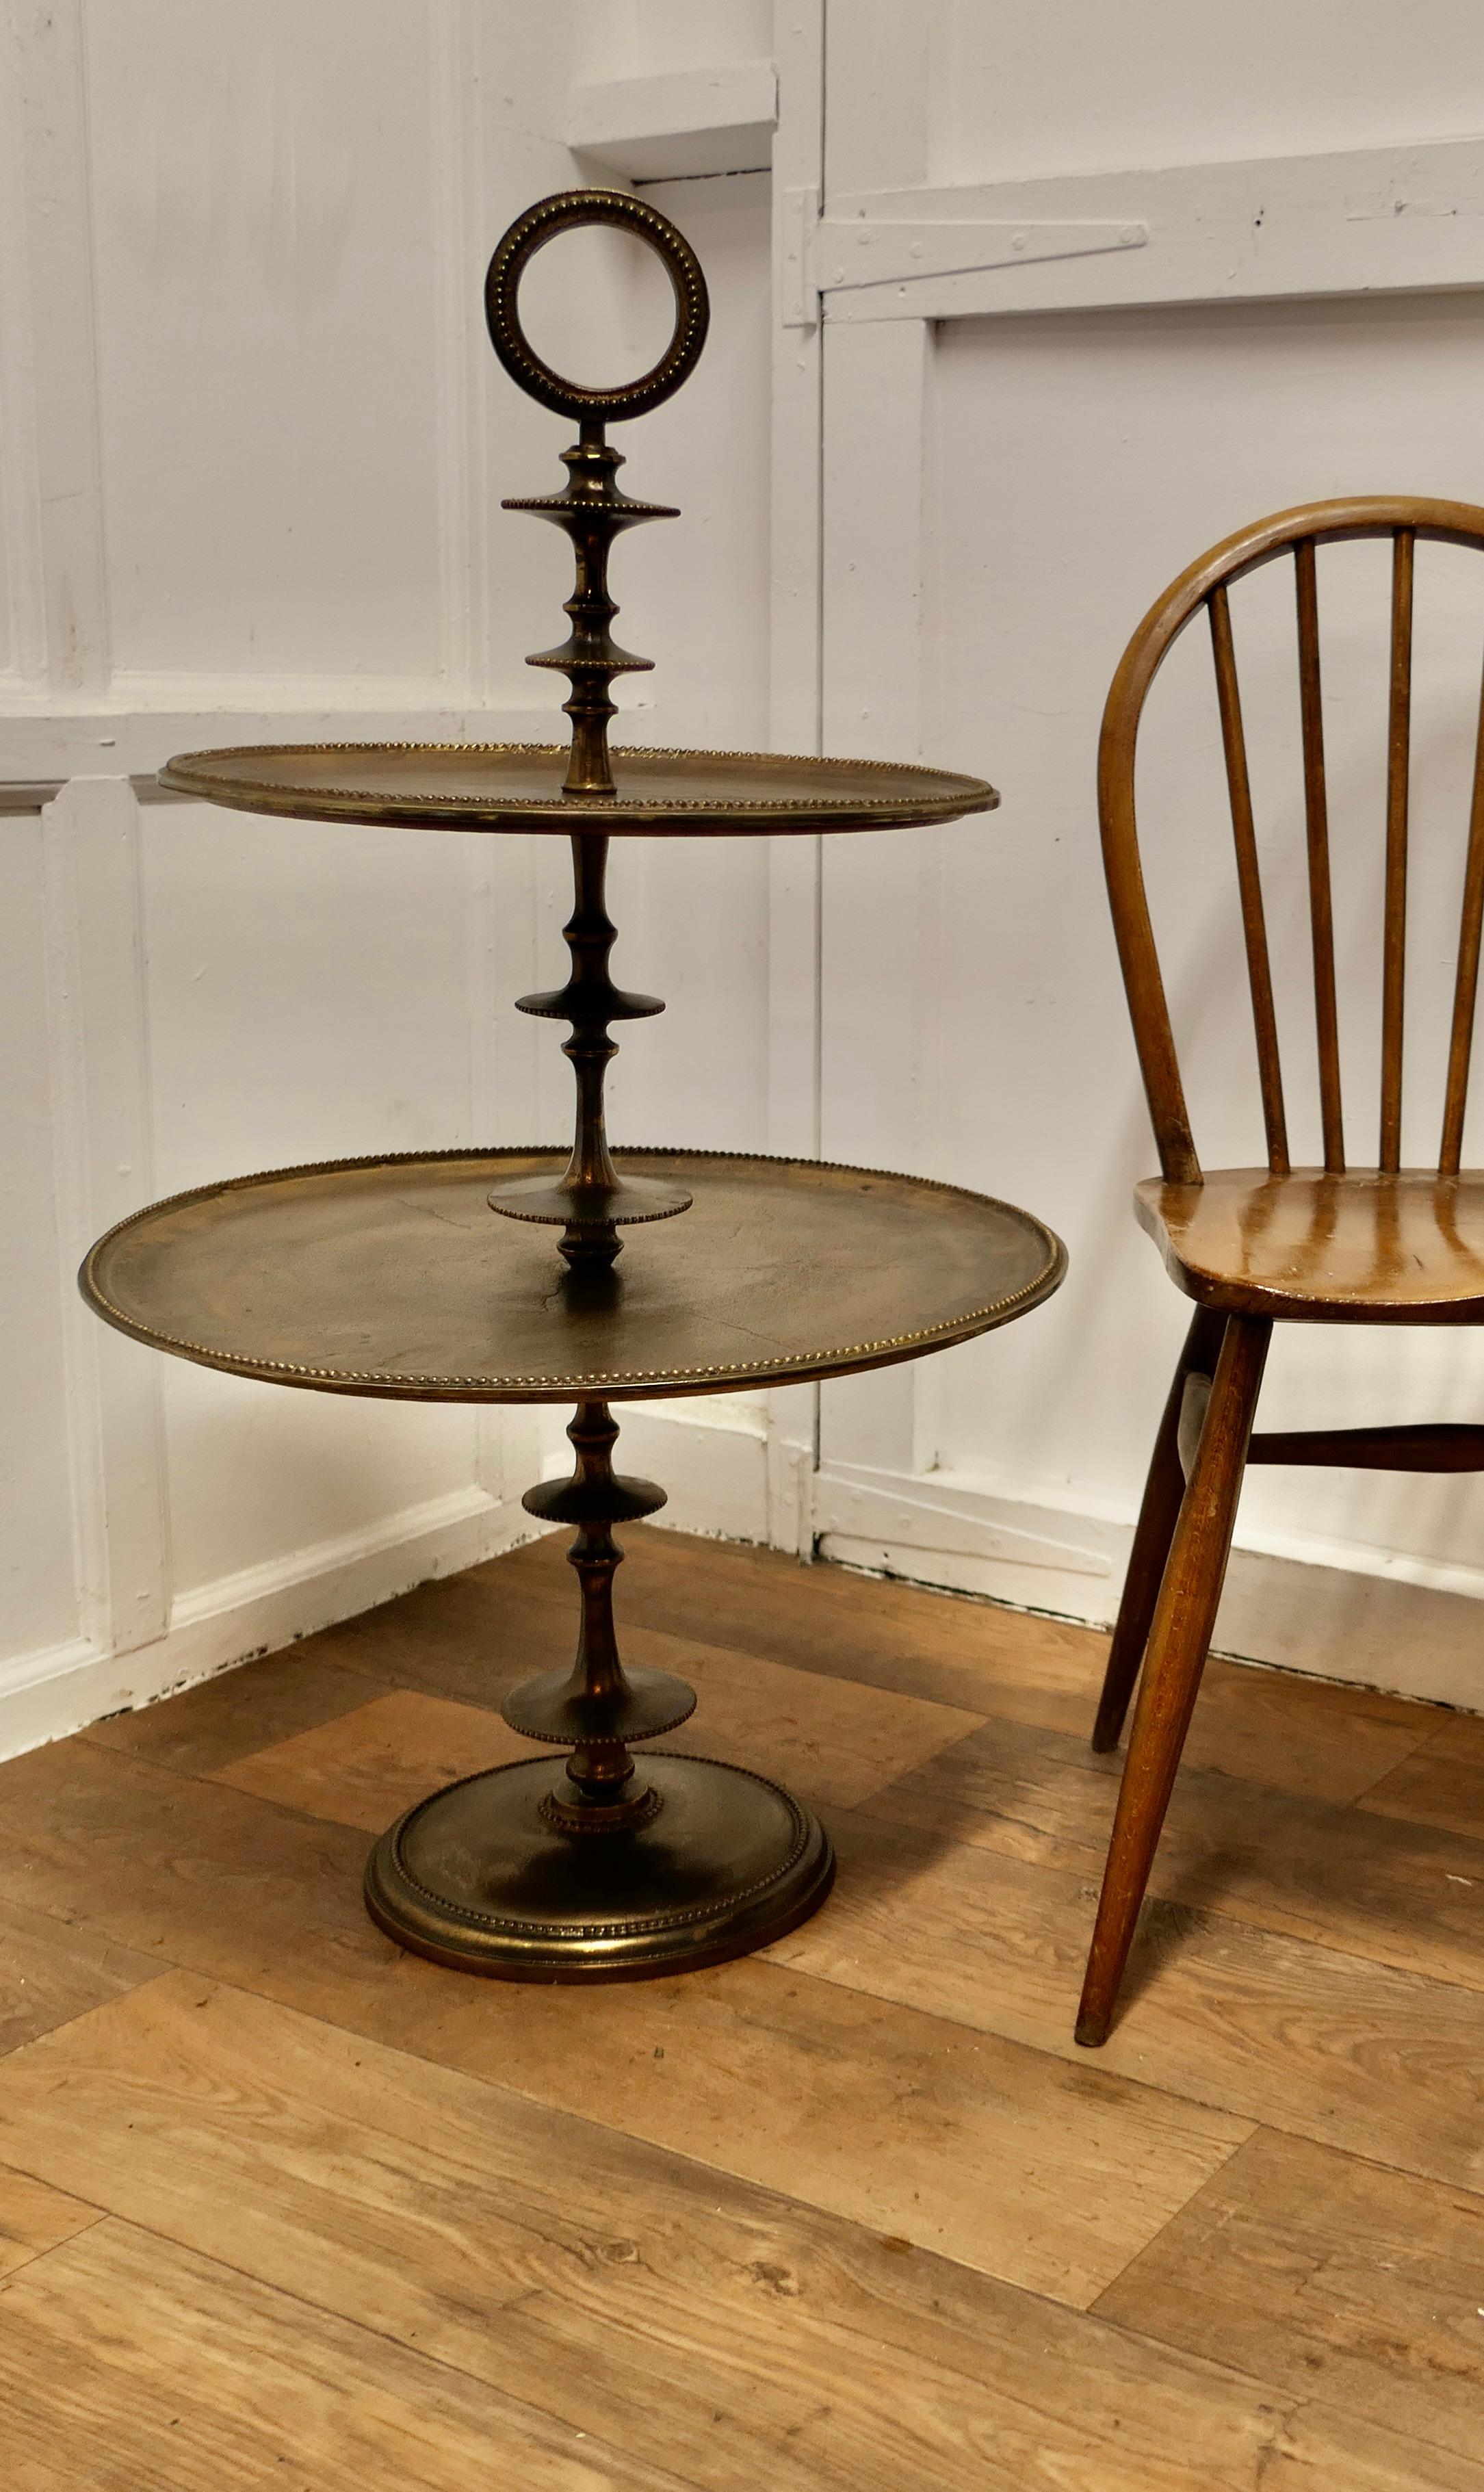 Huge Gueridon Cake Stand or Dumb Waiter 

A charming and unusual piece in good condition, it has 2 tiers,  it is made in iron which has a charming bronzed patina, it has a turned central column and a large ring handle at the very top
The stand is in